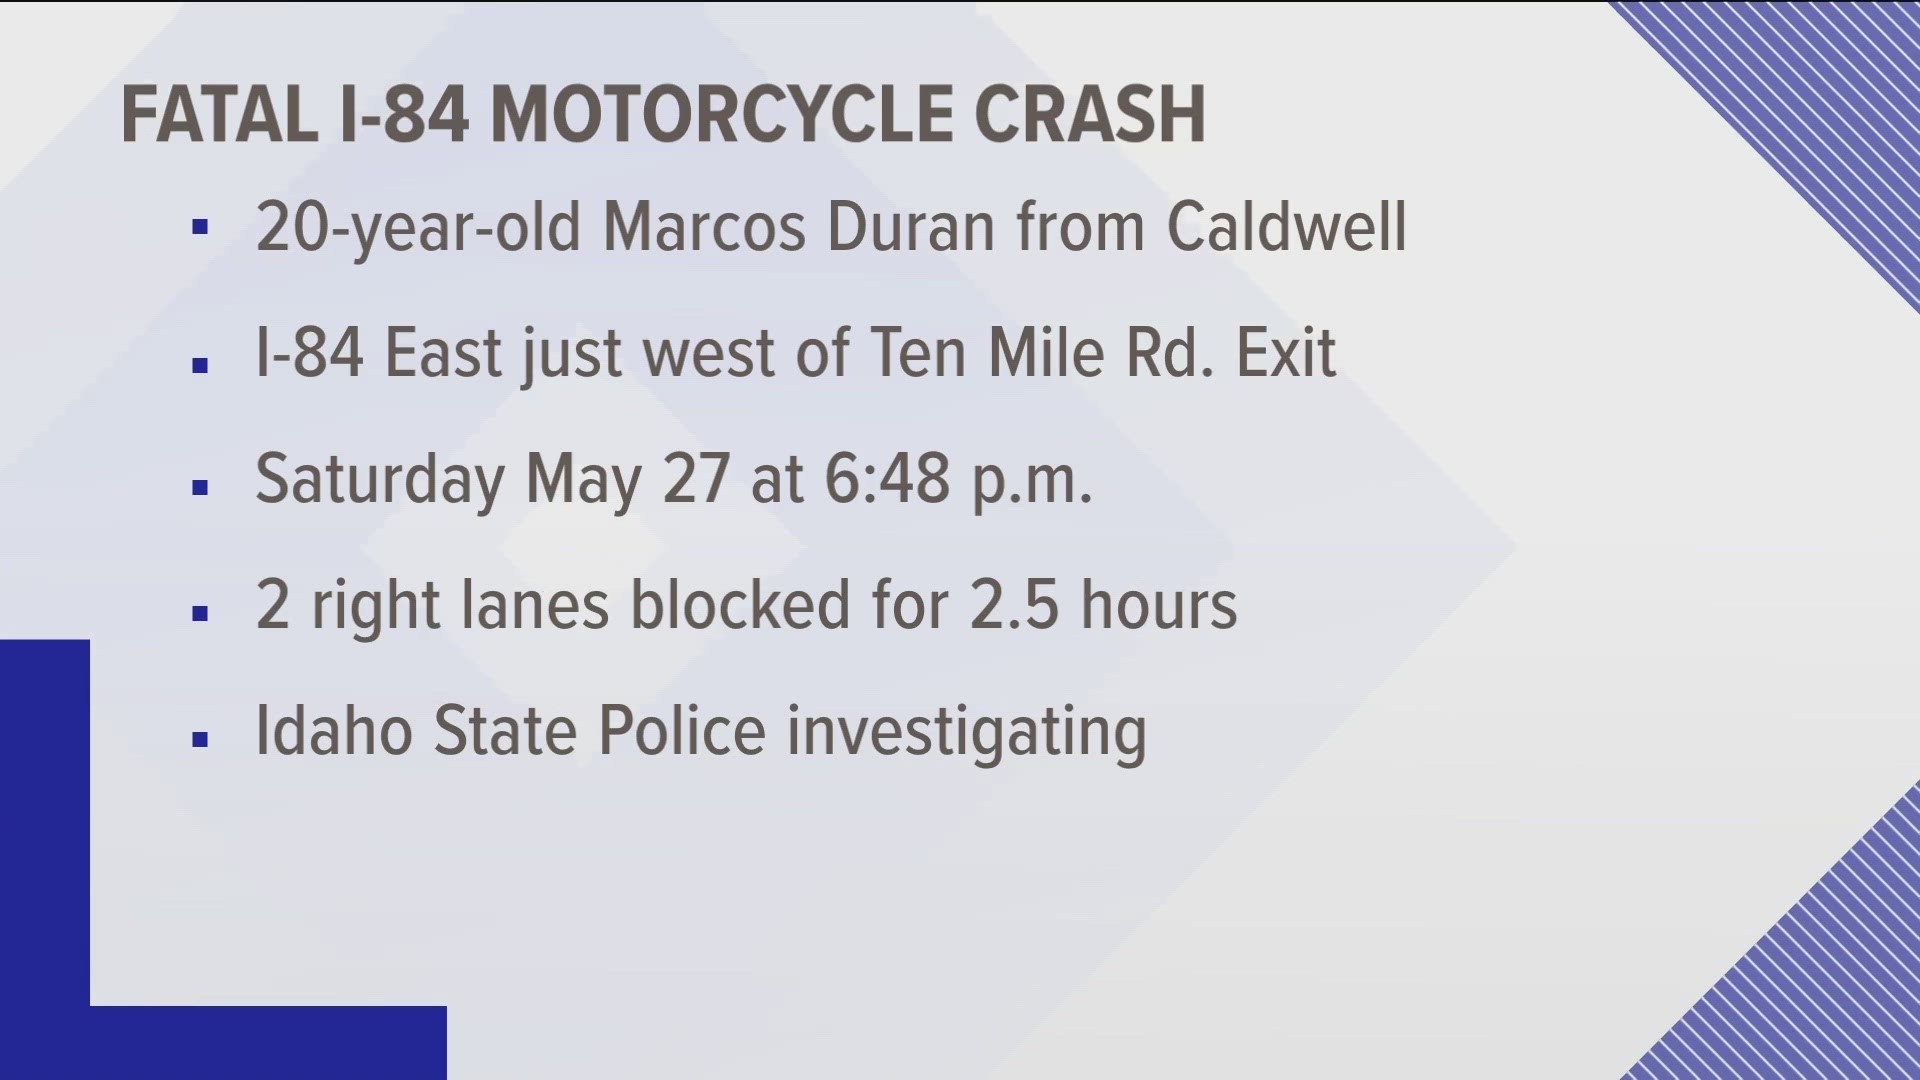 The Ada County Coroner on Tuesday identified the man killed in Sunday's motorcycle crash as 20-year-old Marcos Duran of Caldwell.